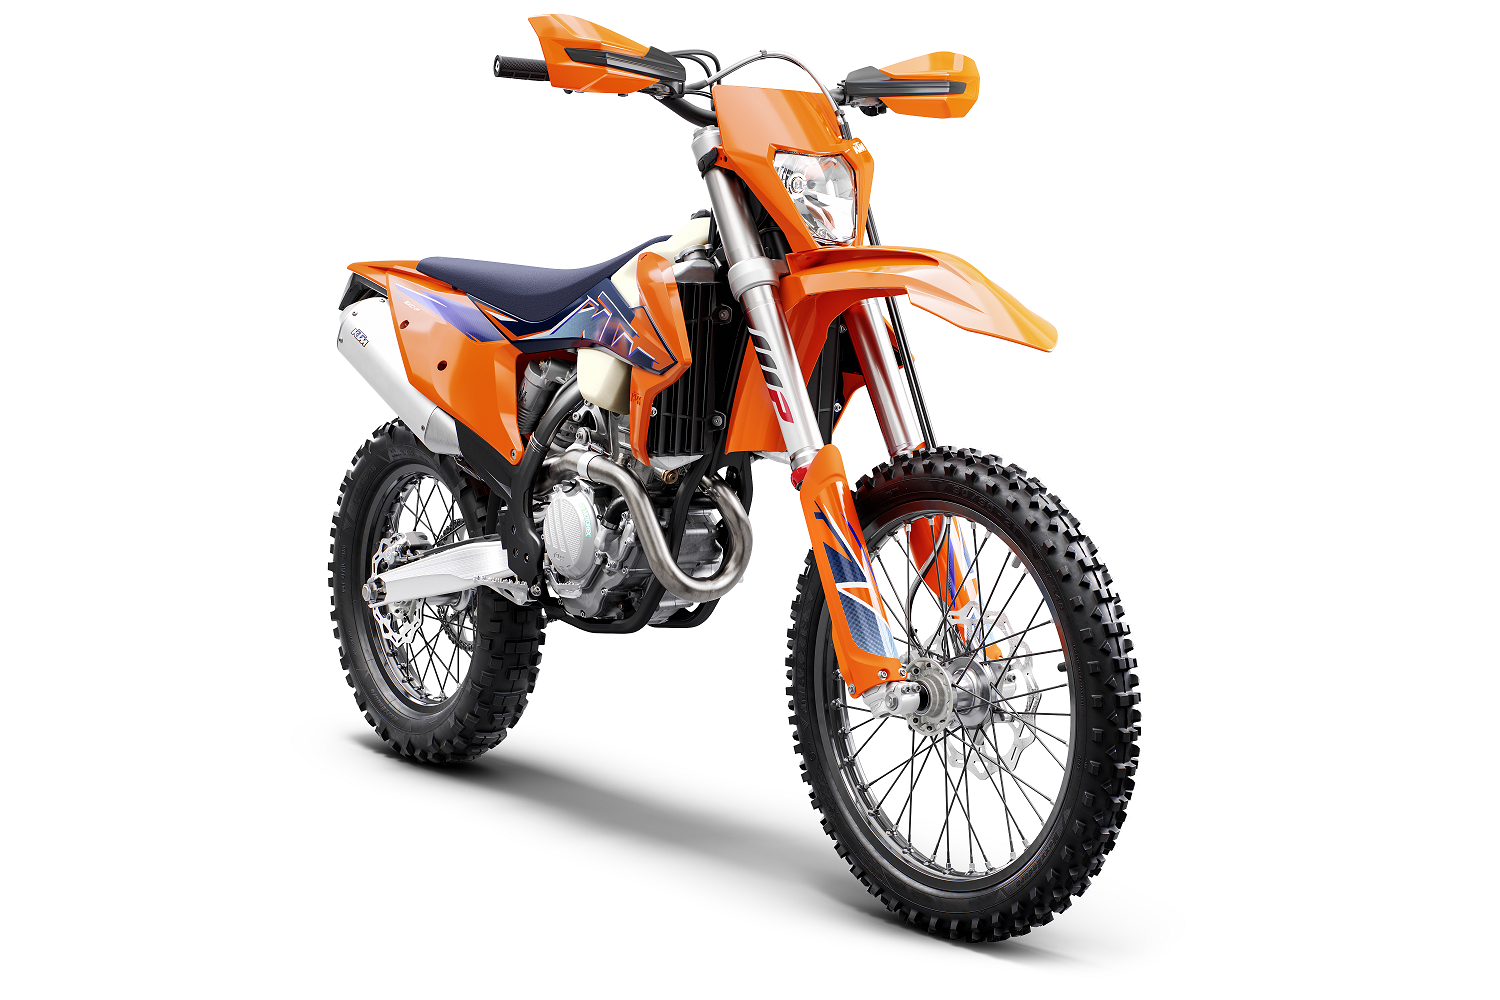 https://www.endurolife.com/wp-content/uploads/2021/05/350-EXC-F-MY22-Front-Right-1.png